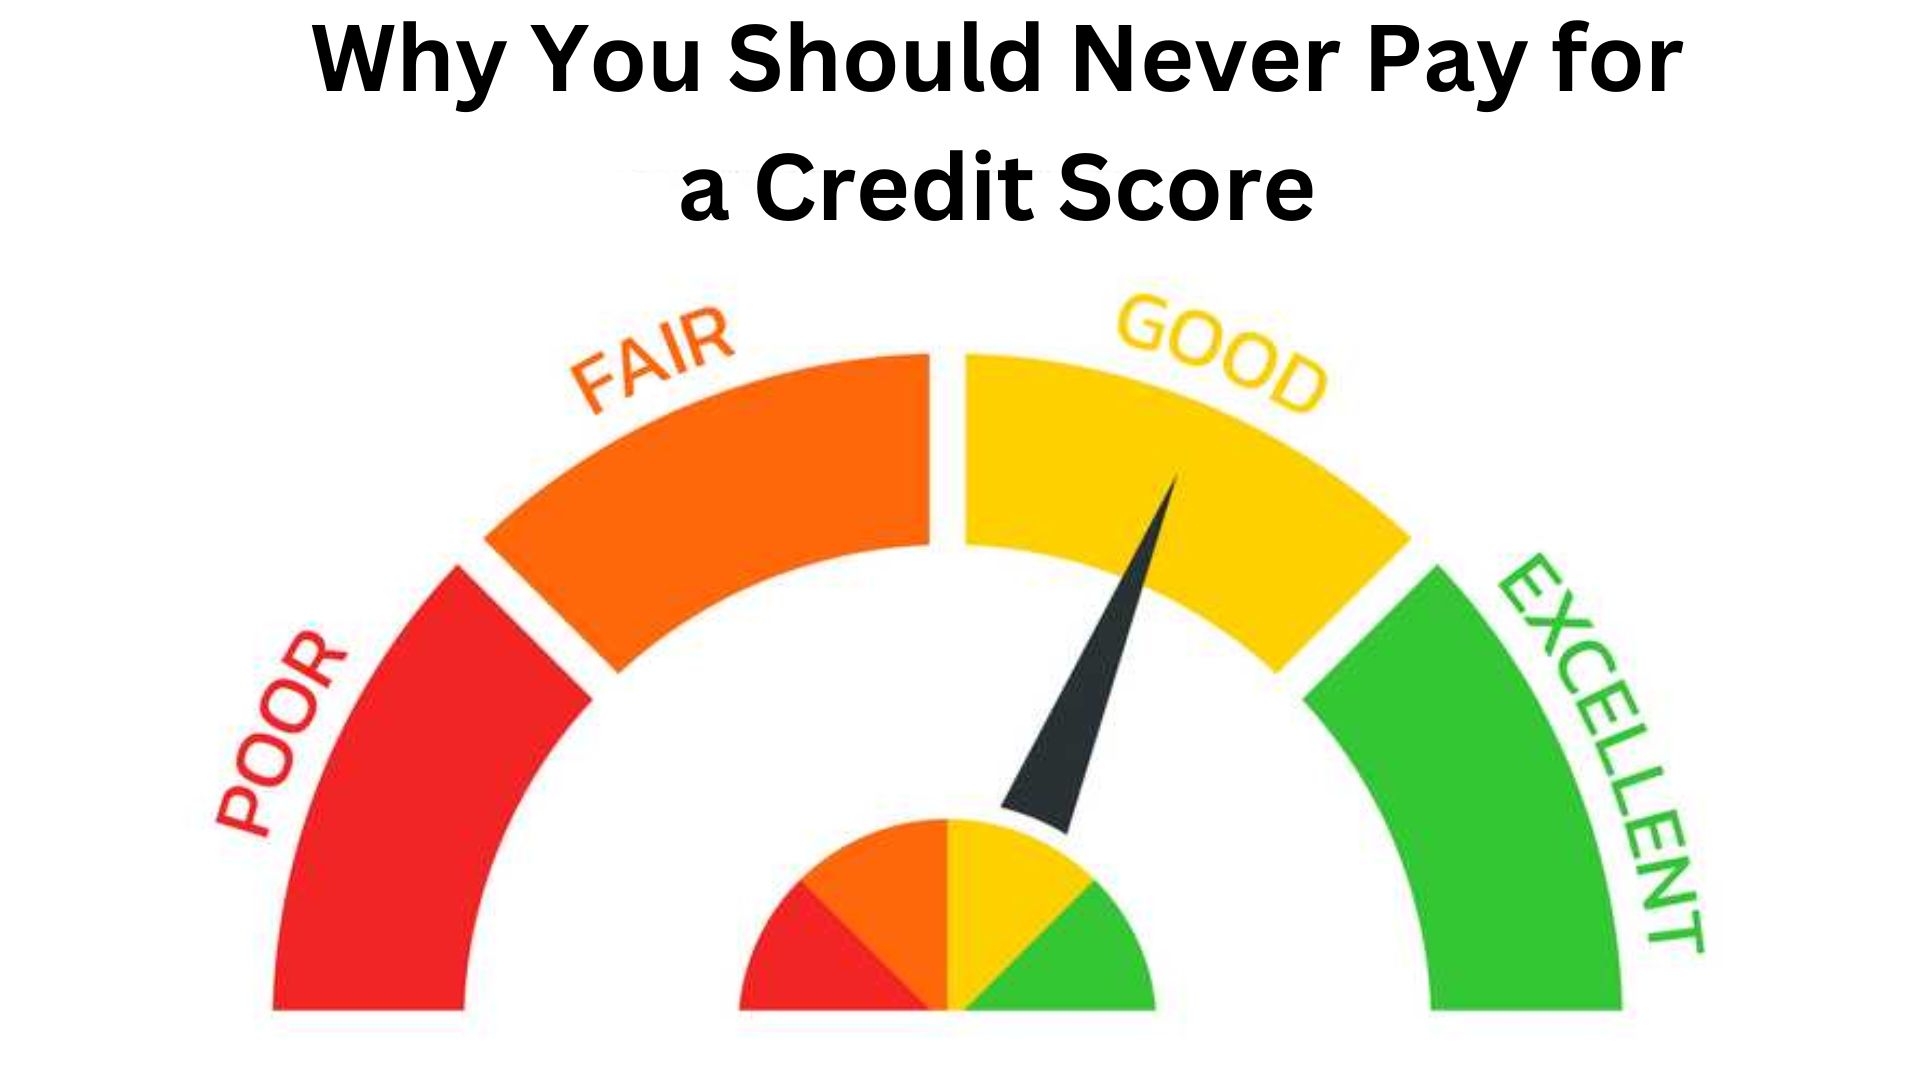 Why You Should Never Pay for a Credit Score